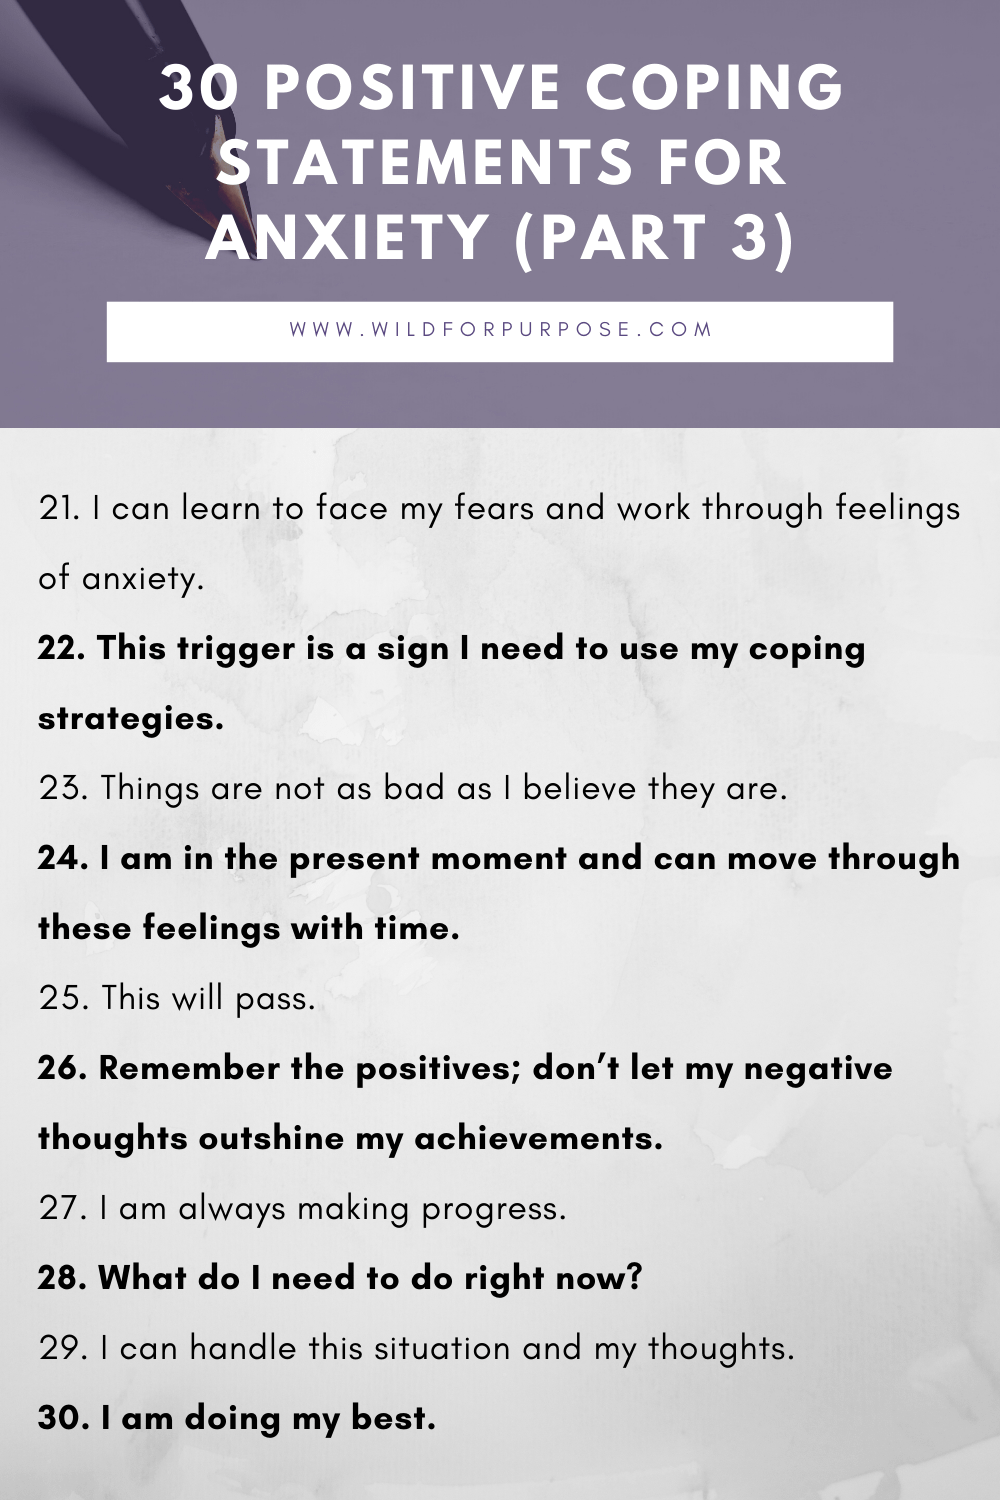 30 Positive Coping Statements For Anxiety, Image Part 3